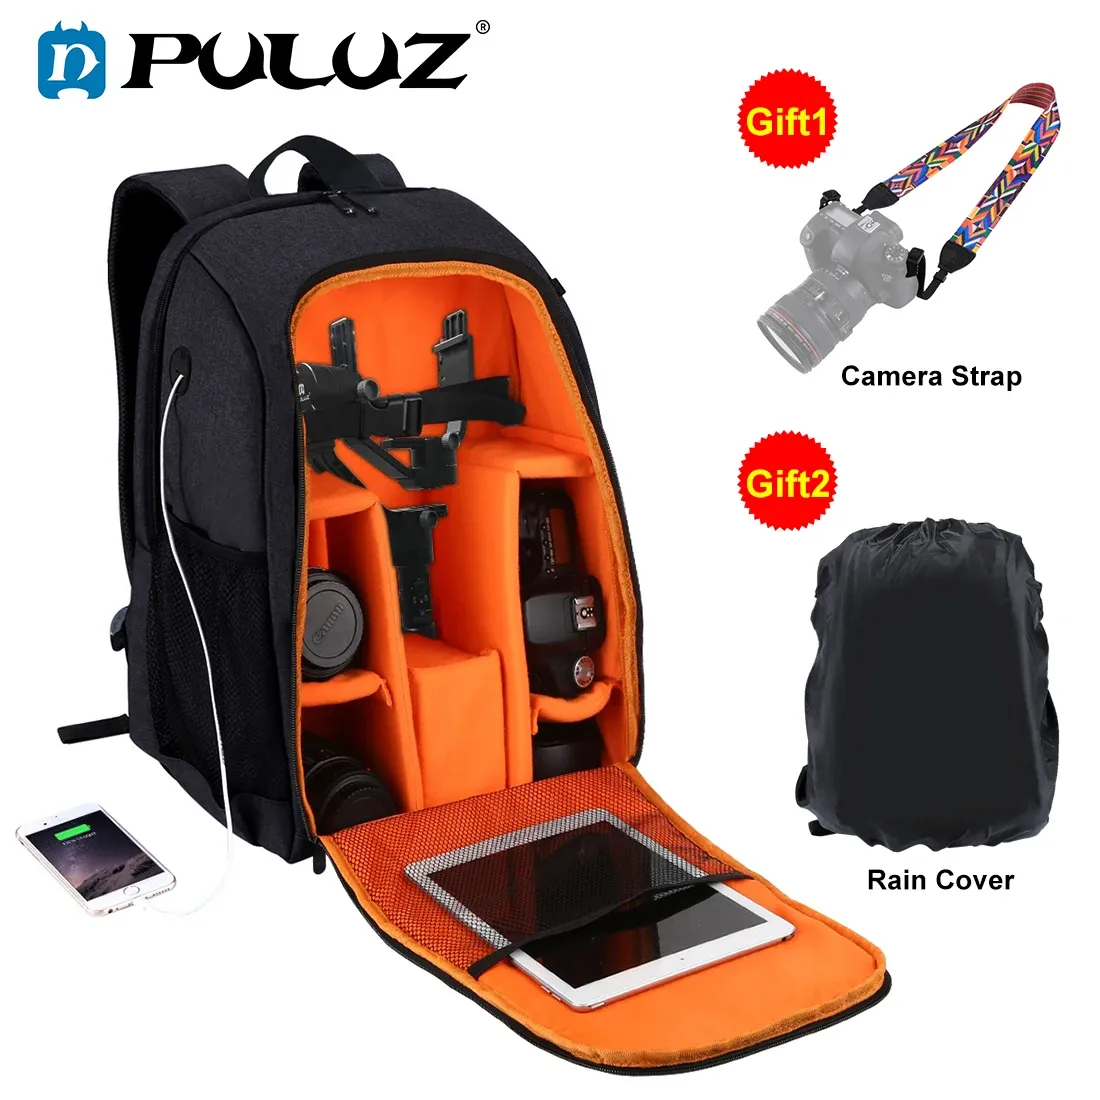 Sacs PULUZ OUTDOOOR PORTABLE IMPRÉPERSIR SCRACKEPHOP DUUAL DUAL SHAPPACK CAMEAPACK CAME CAMERA SAC PHOTO DIMMODE DIMICILLE DSLR BAGRAIN COUVERTURE